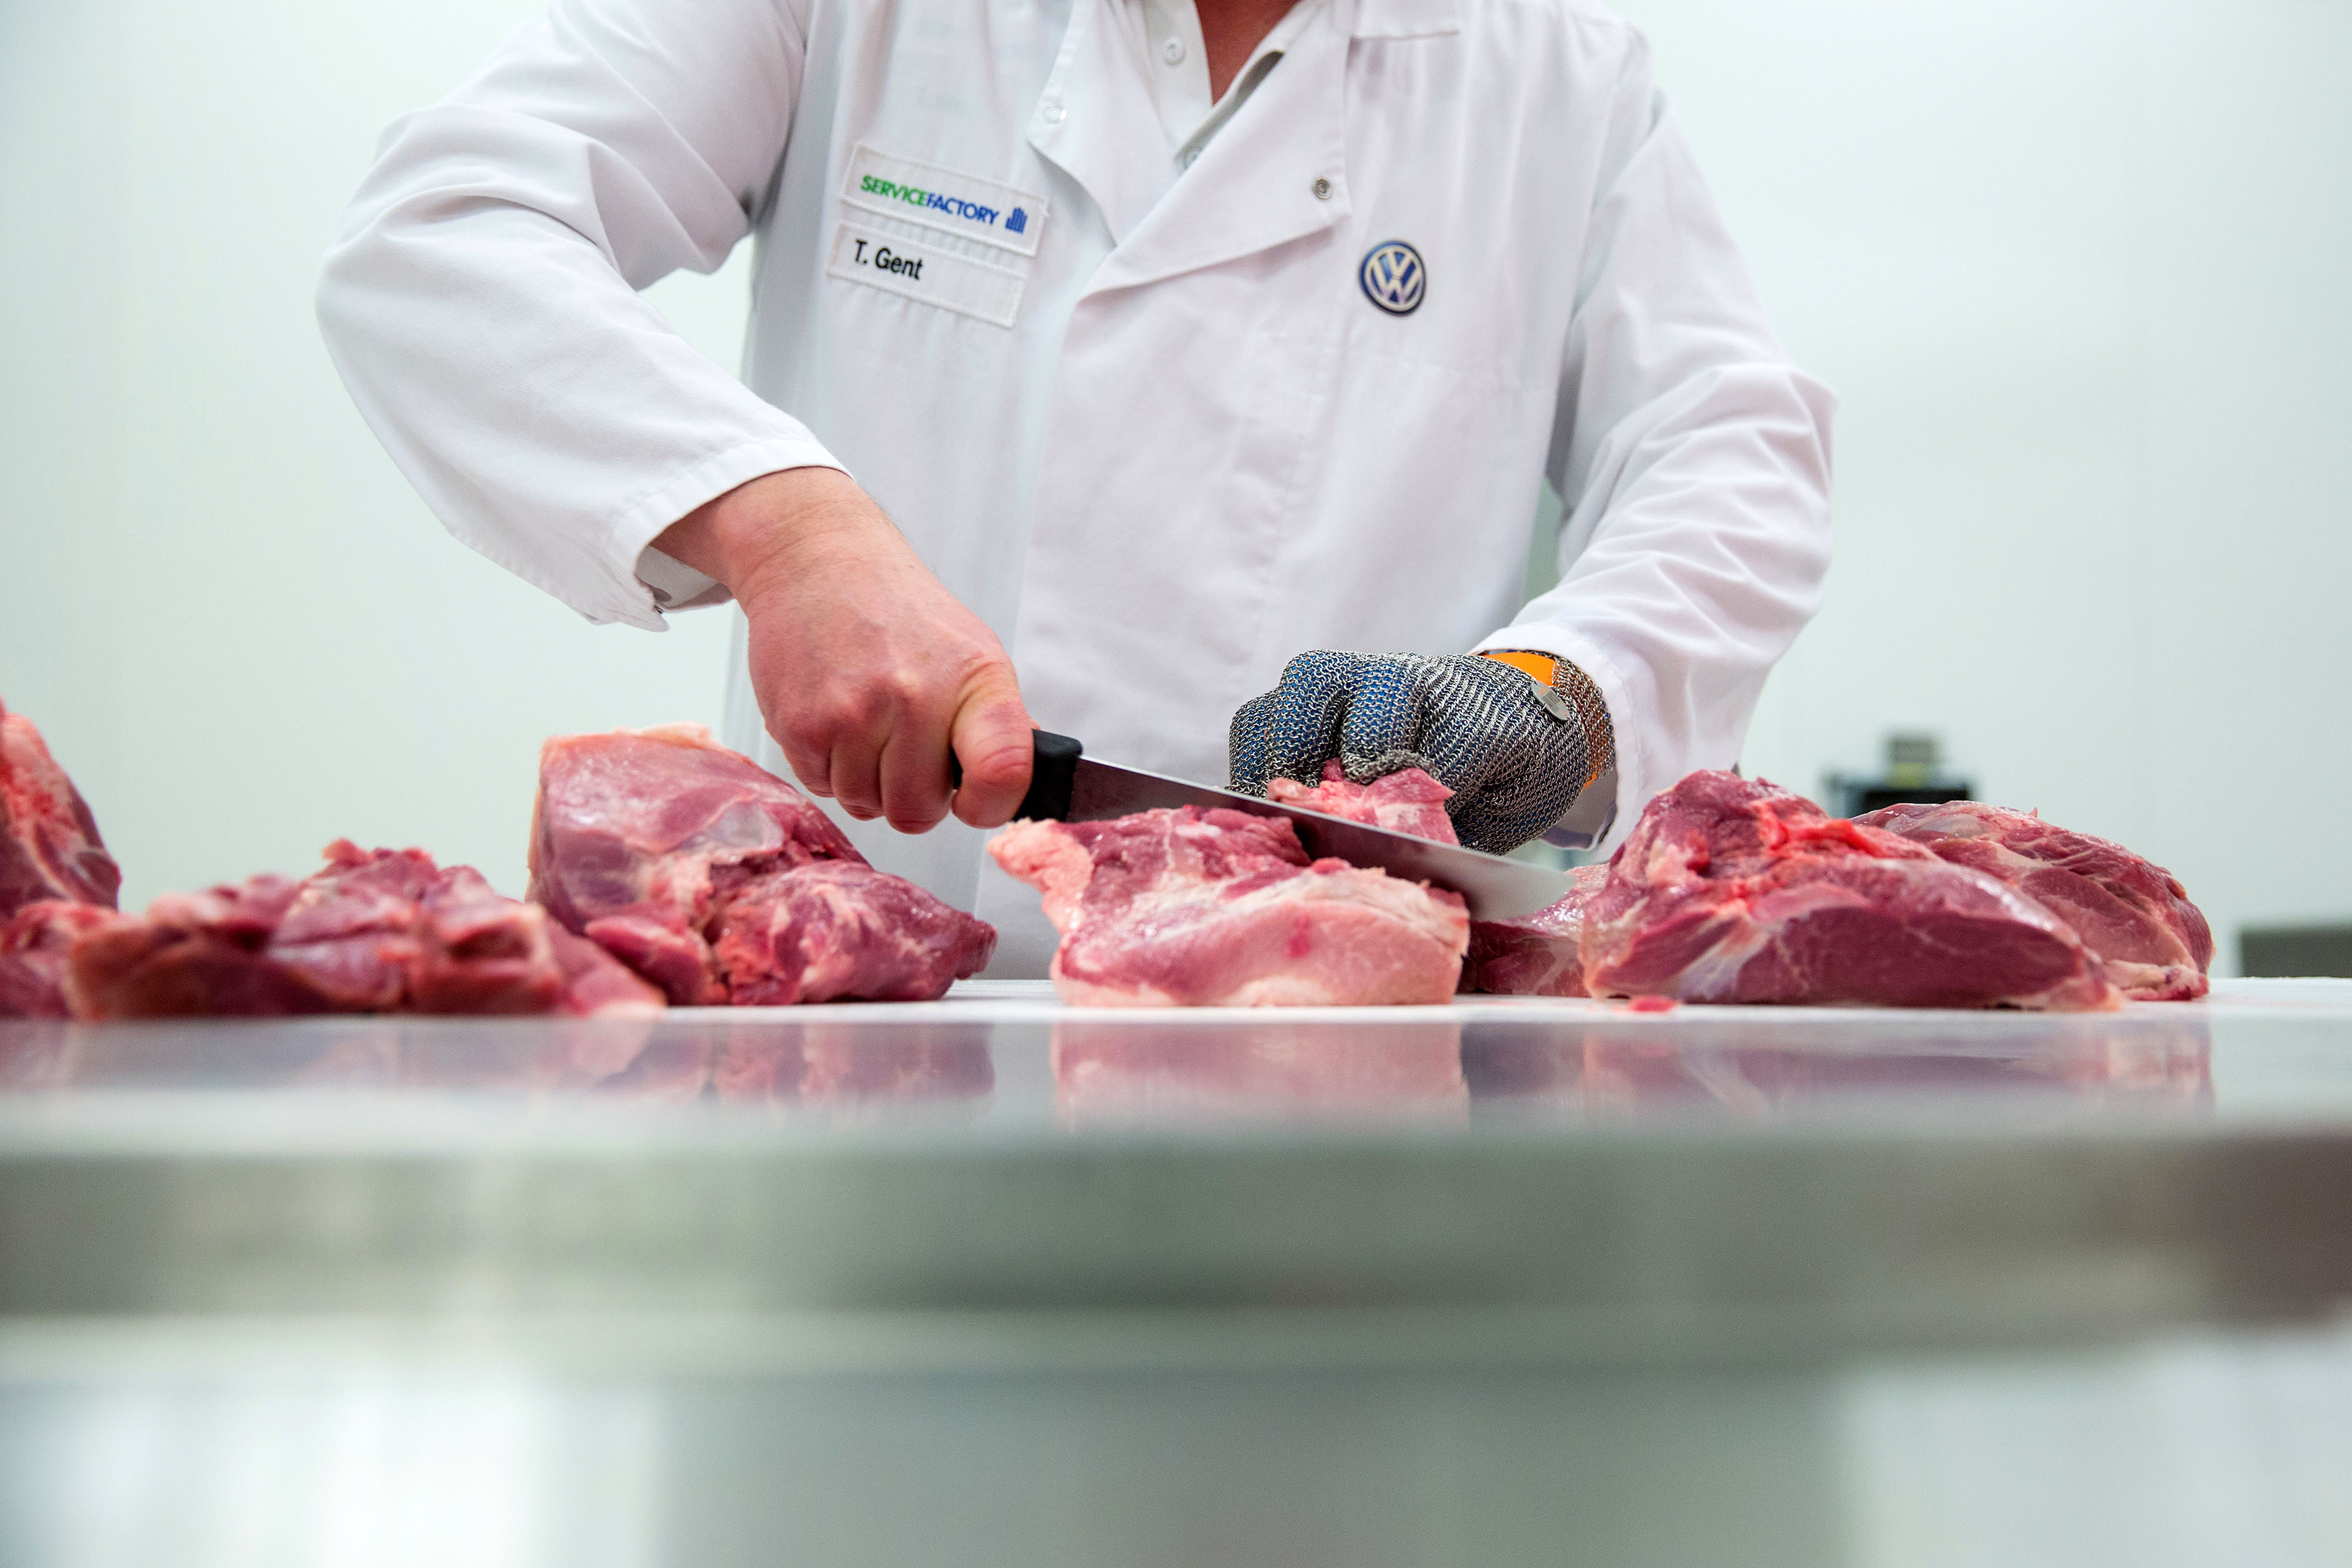 A butcher slices cuts of pork at the currywurst sausage production line in the Volkswagen AG (VW) manufacturing plant in Wolfsburg, Germany.